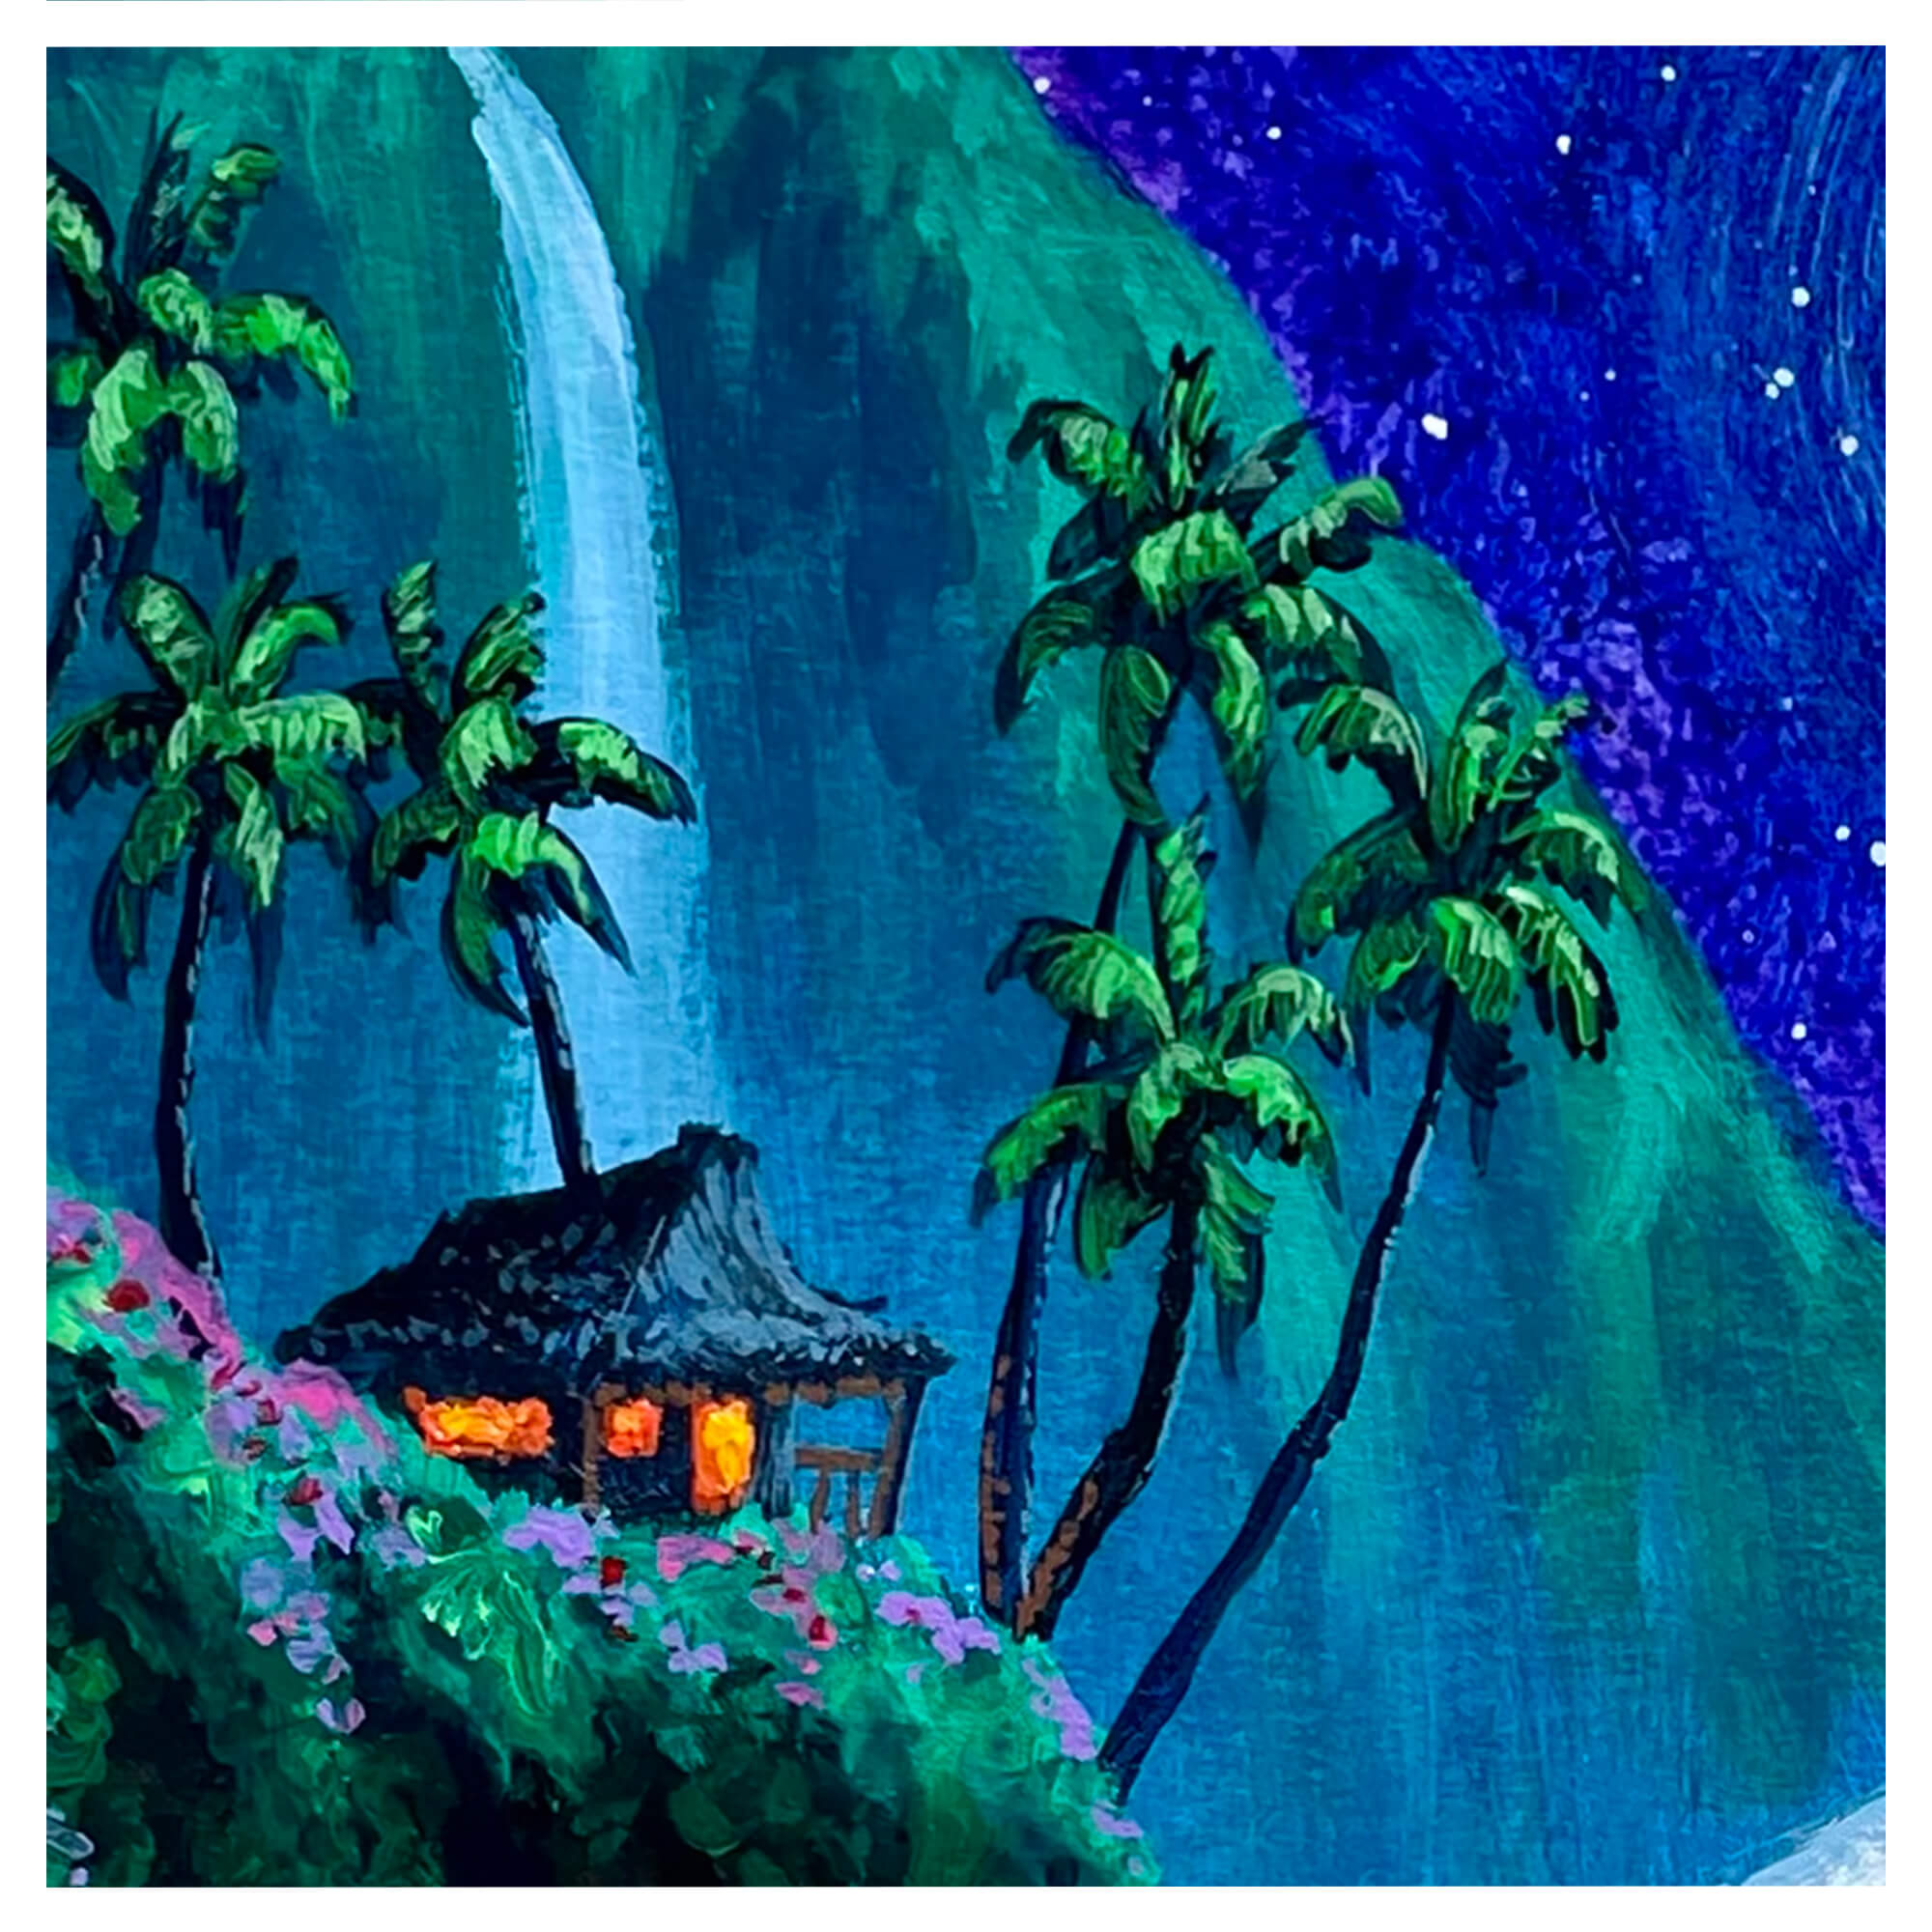 A night view of a tropical paradise with a hut on a distant island and a waterfall background by Hawaii artist Patrick Parker